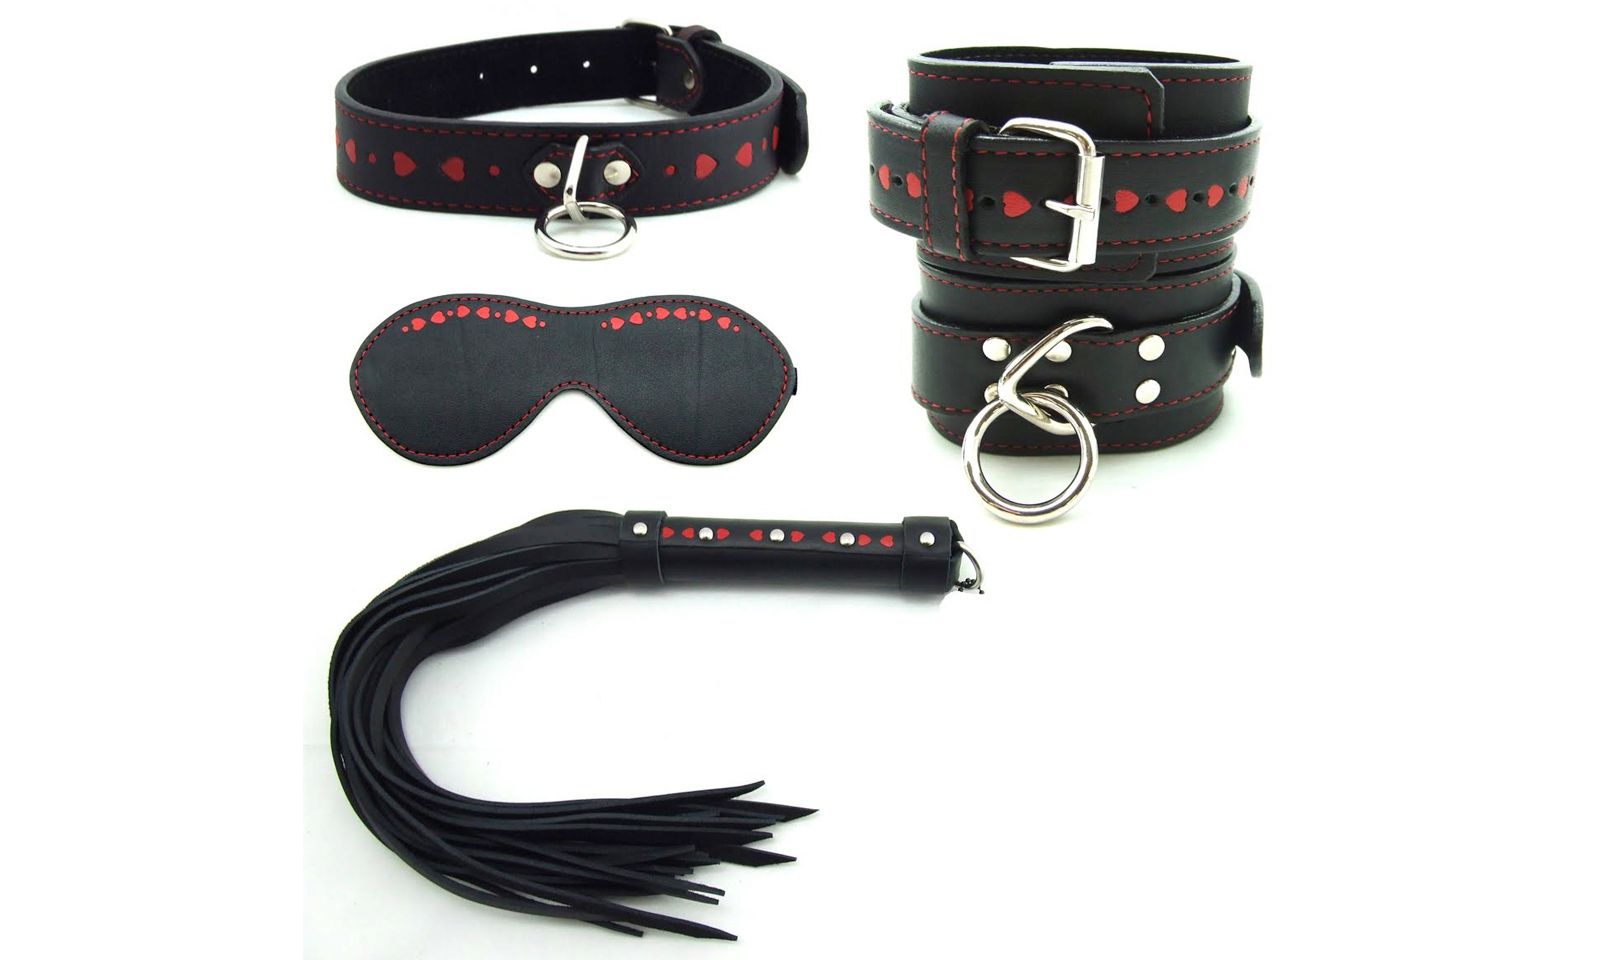 PHS International’s BDSM Accessory Collection Hearts A’fire